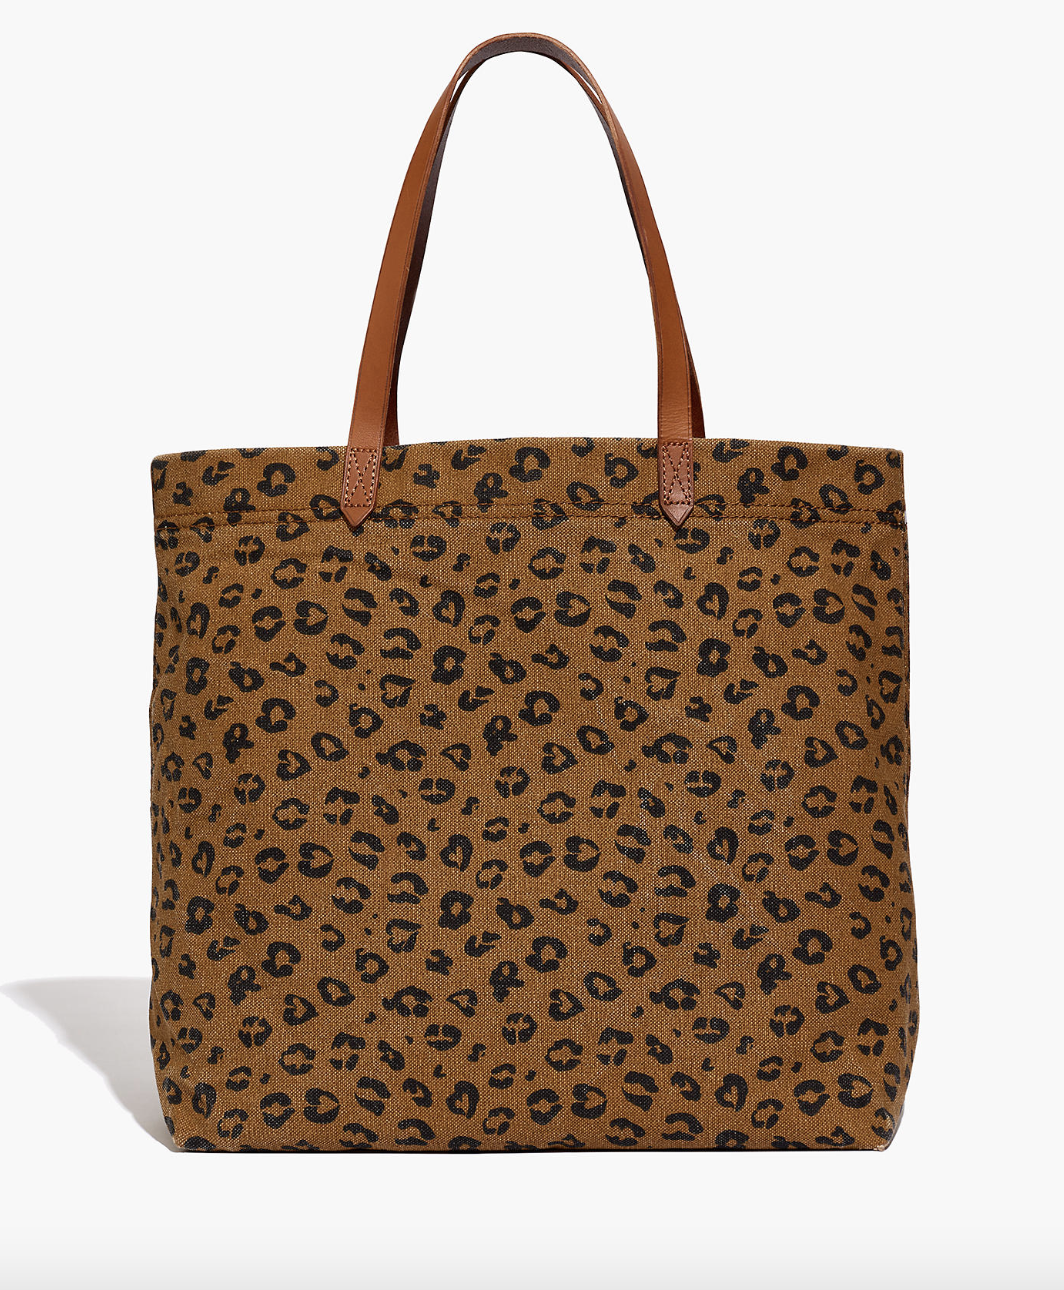 A cheetah print canvas tote bag with leather straps 